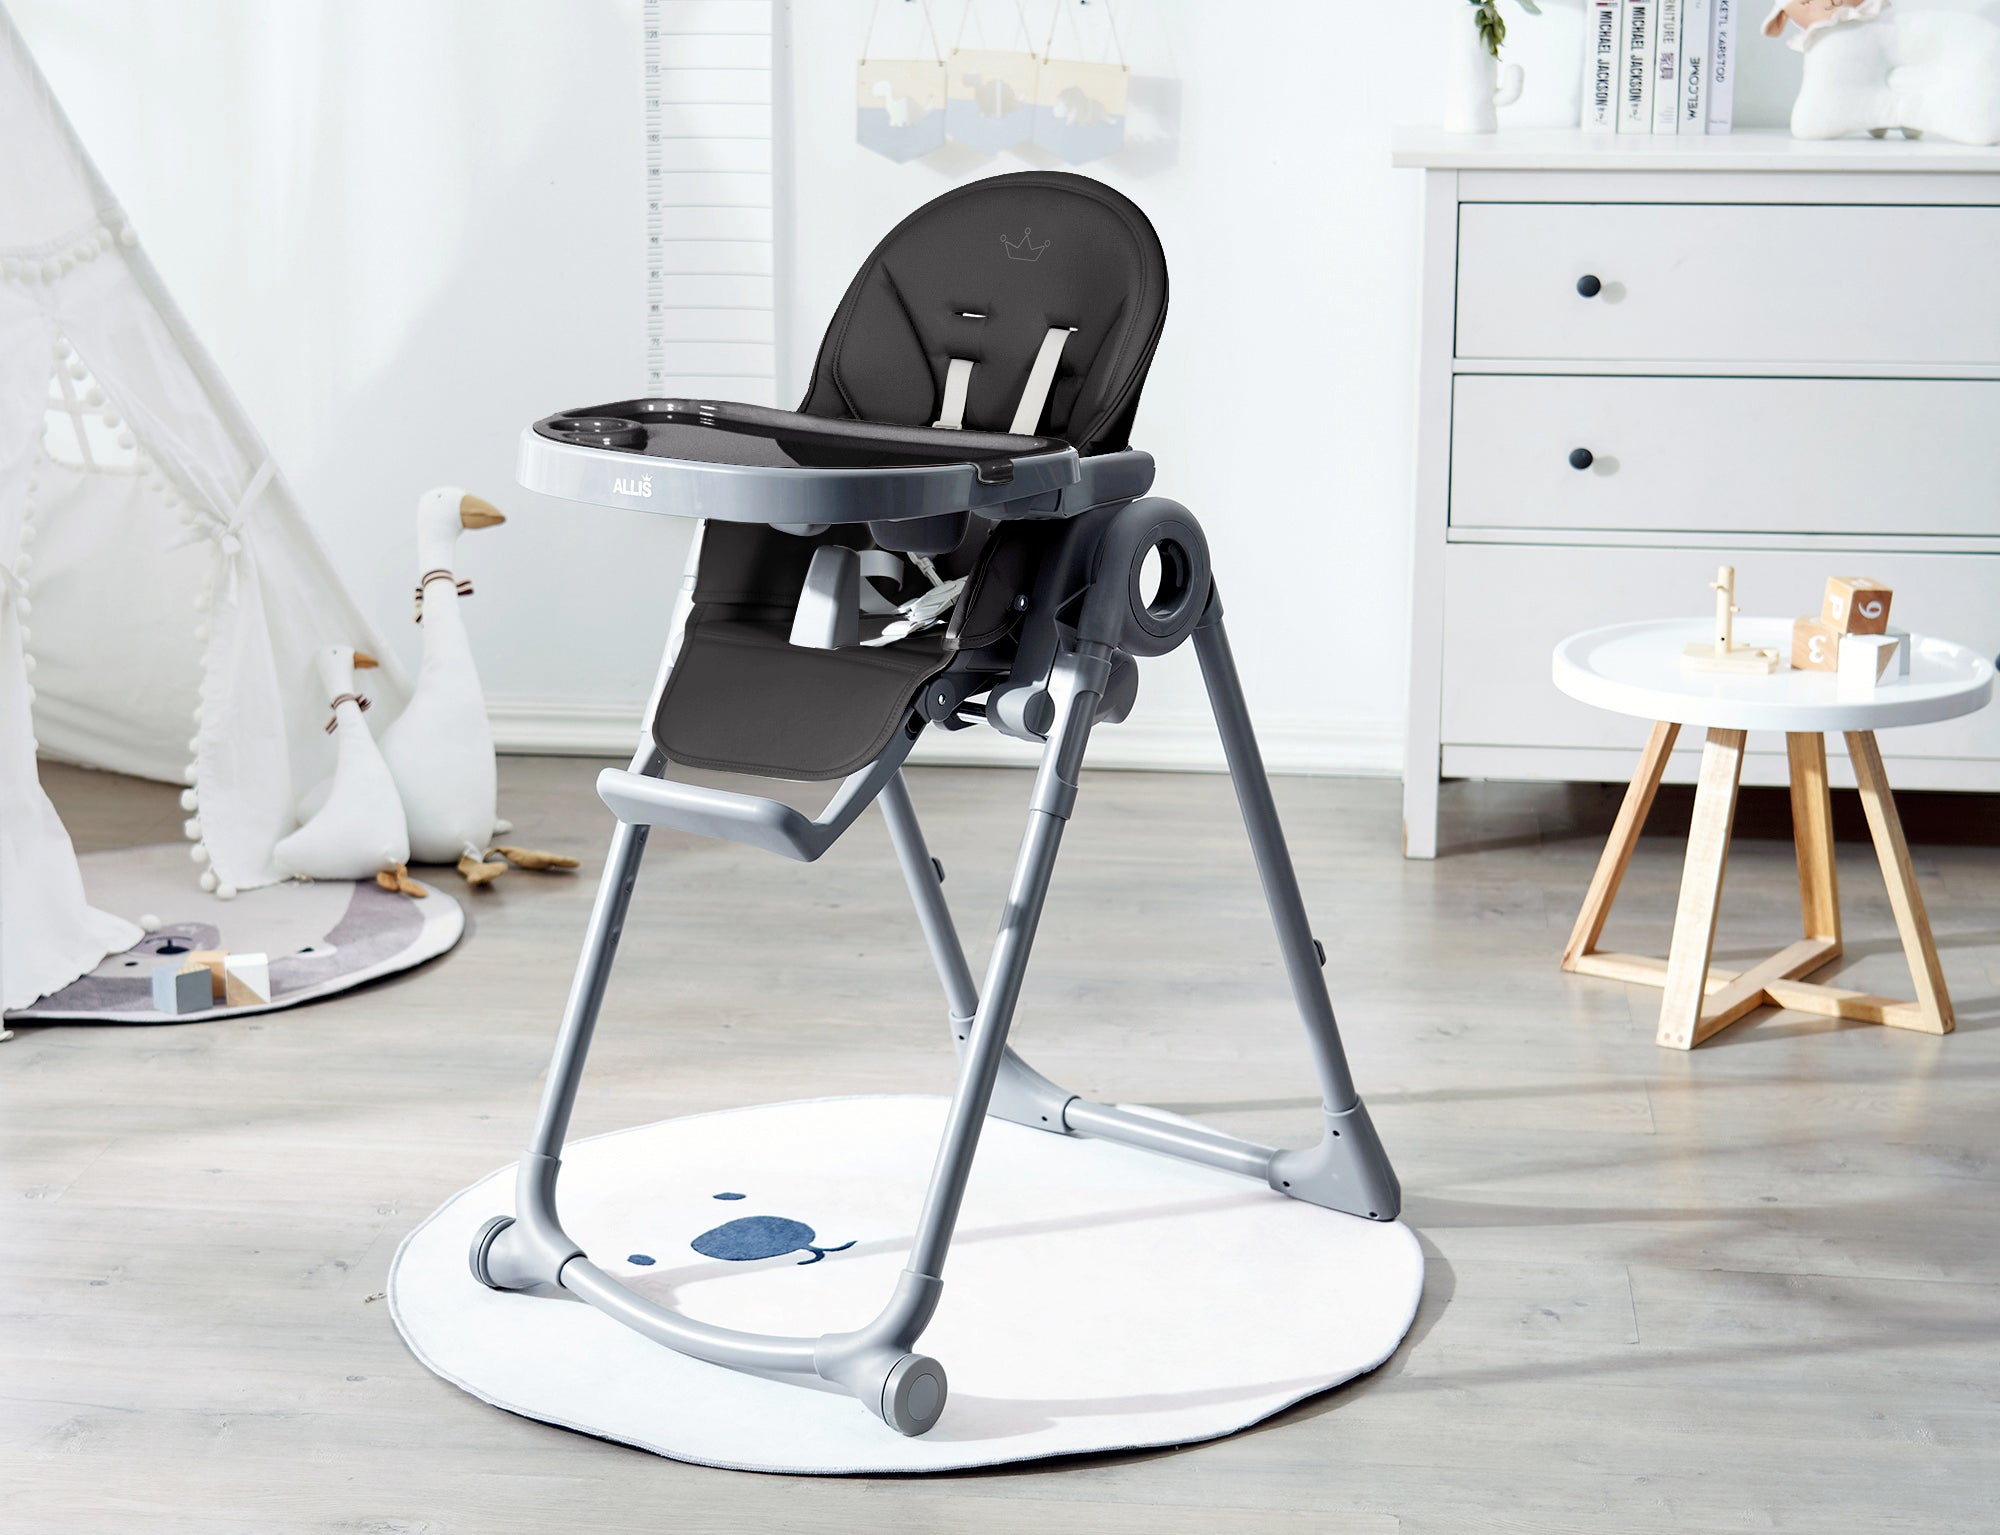 Lola Adjustable Highchair for 6 months +